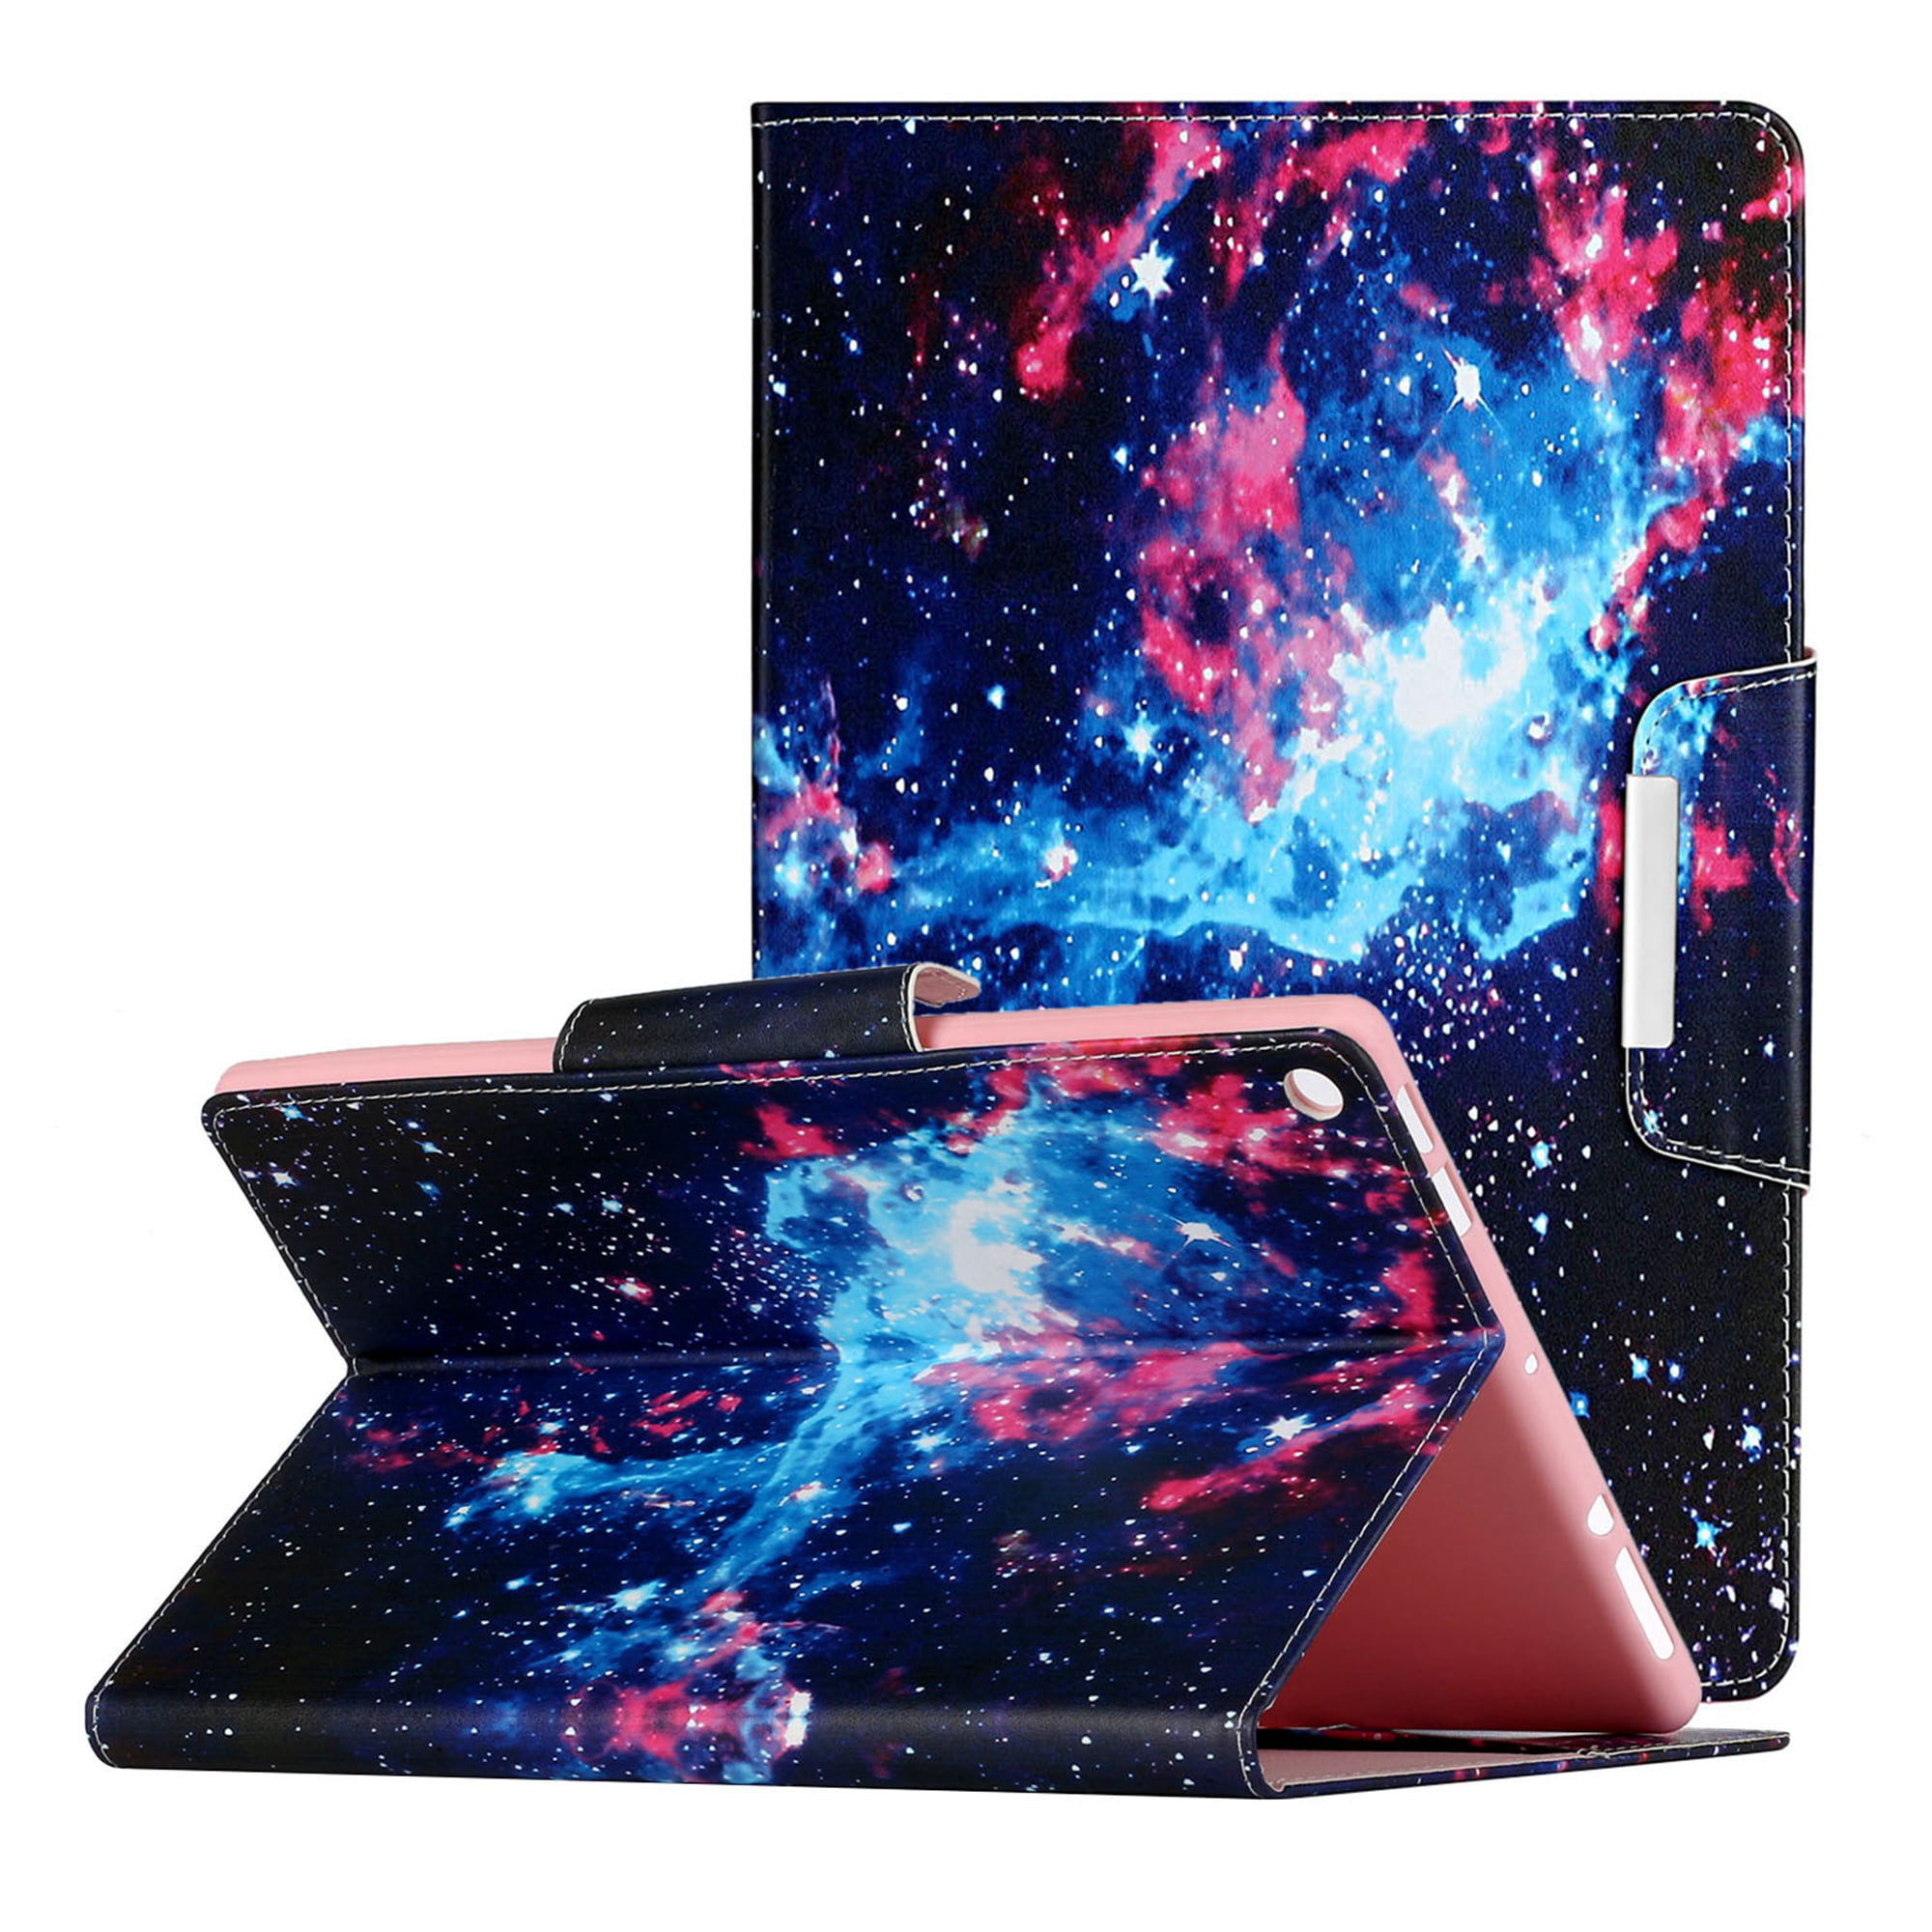 7th Generation 2017 Release Fire 7 Tablet Case Premium PU Leather Ultra Slim 3D Pattern Smart Stand Cover with Auto Wake/Sleep for All-New  Fire 7 Tablet Beach 